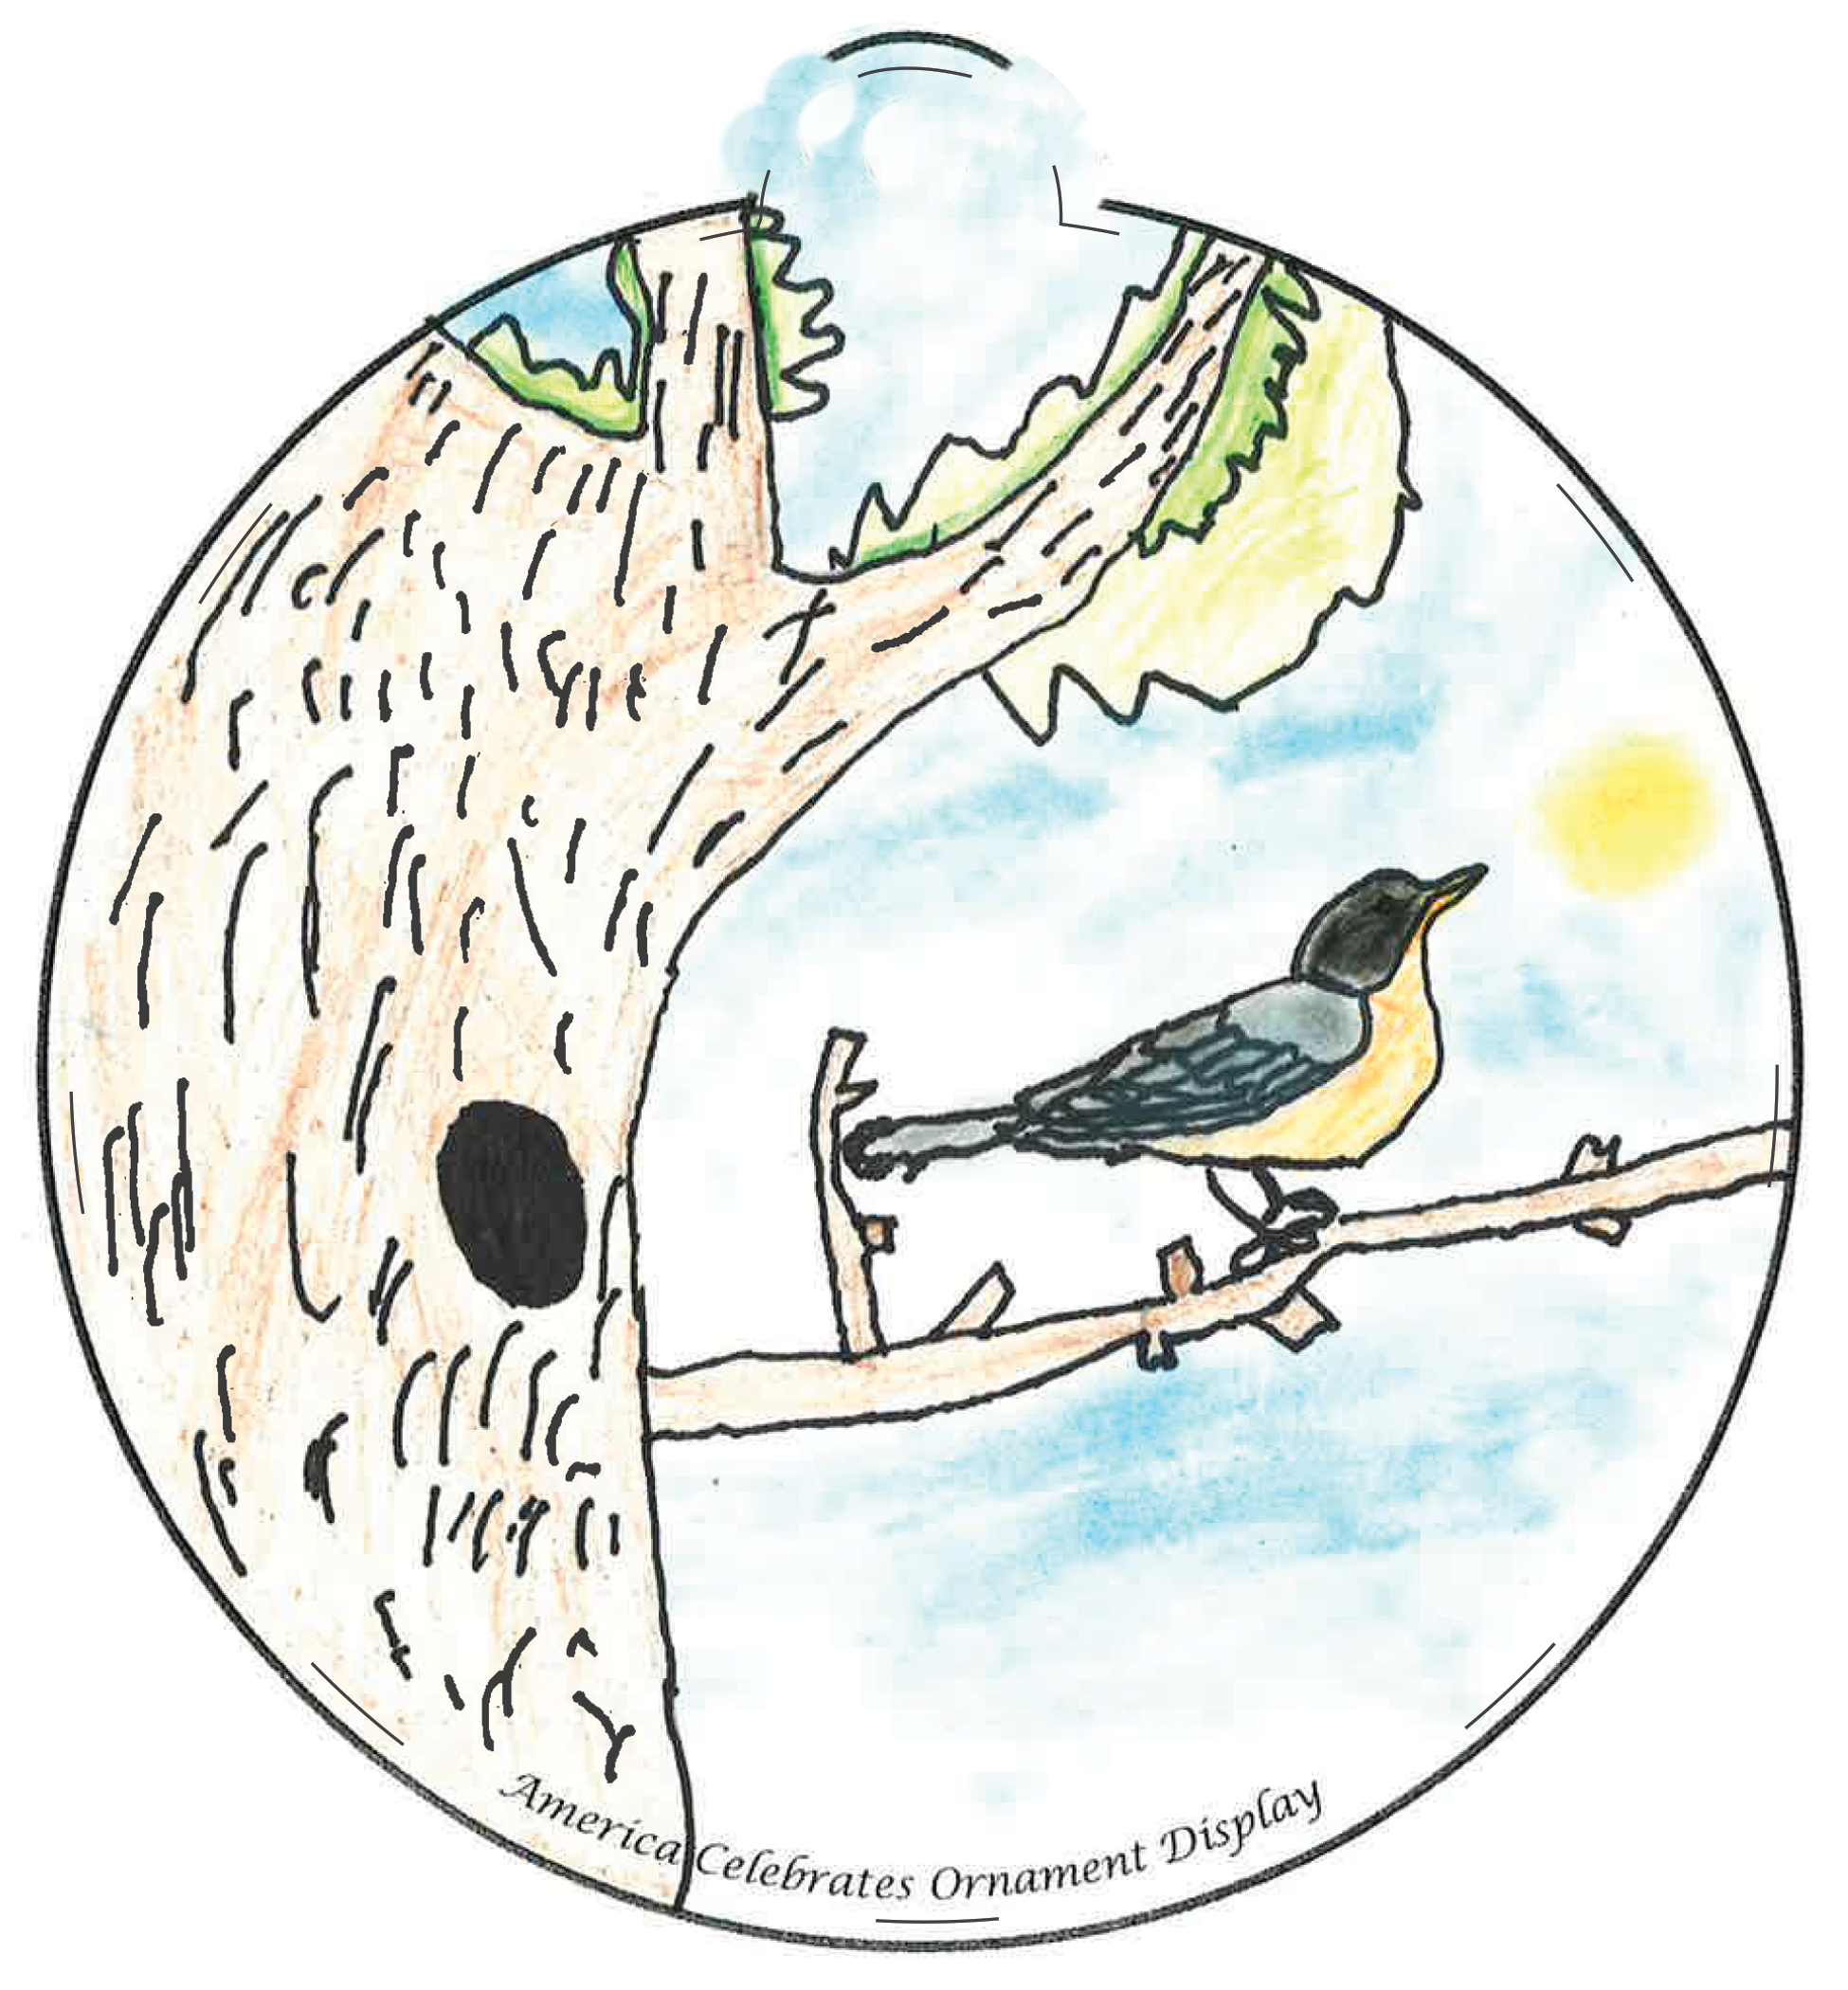 Ornament depicting an American Robin on a tree branch